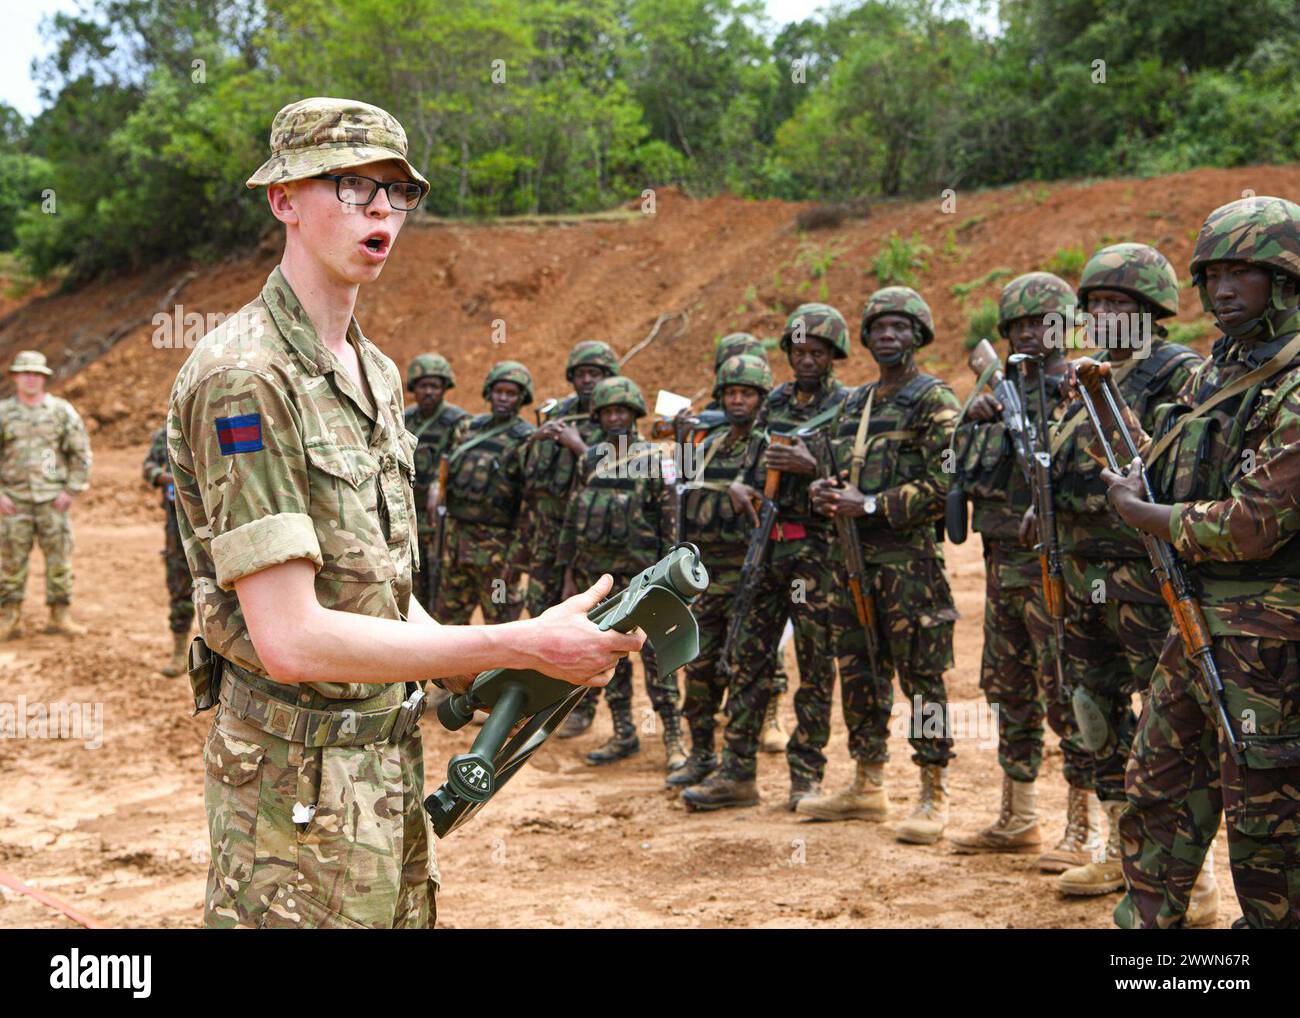 British army Drummer Todd Yates, assigned to 1st Battalion Irish Guards, 11th Security Force Assistance Brigade, British Army, demonstrates how to assemble a mine detector to Kenya Defence Forces during counter improvised explosive devices training at Justified Accord 2024 (JA24) held at the Counter Insurgency Terrorism and Stability Training Centre, Nanyuki, Kenya, February 26, 2024. JA24 is U.S. Africa Command's largest exercise in East Africa, running from February 26 - March 7. Led by U.S. Army Southern European Task Force, Africa (SETAF-AF), and hosted in Kenya, this year's exercise will Stock Photo